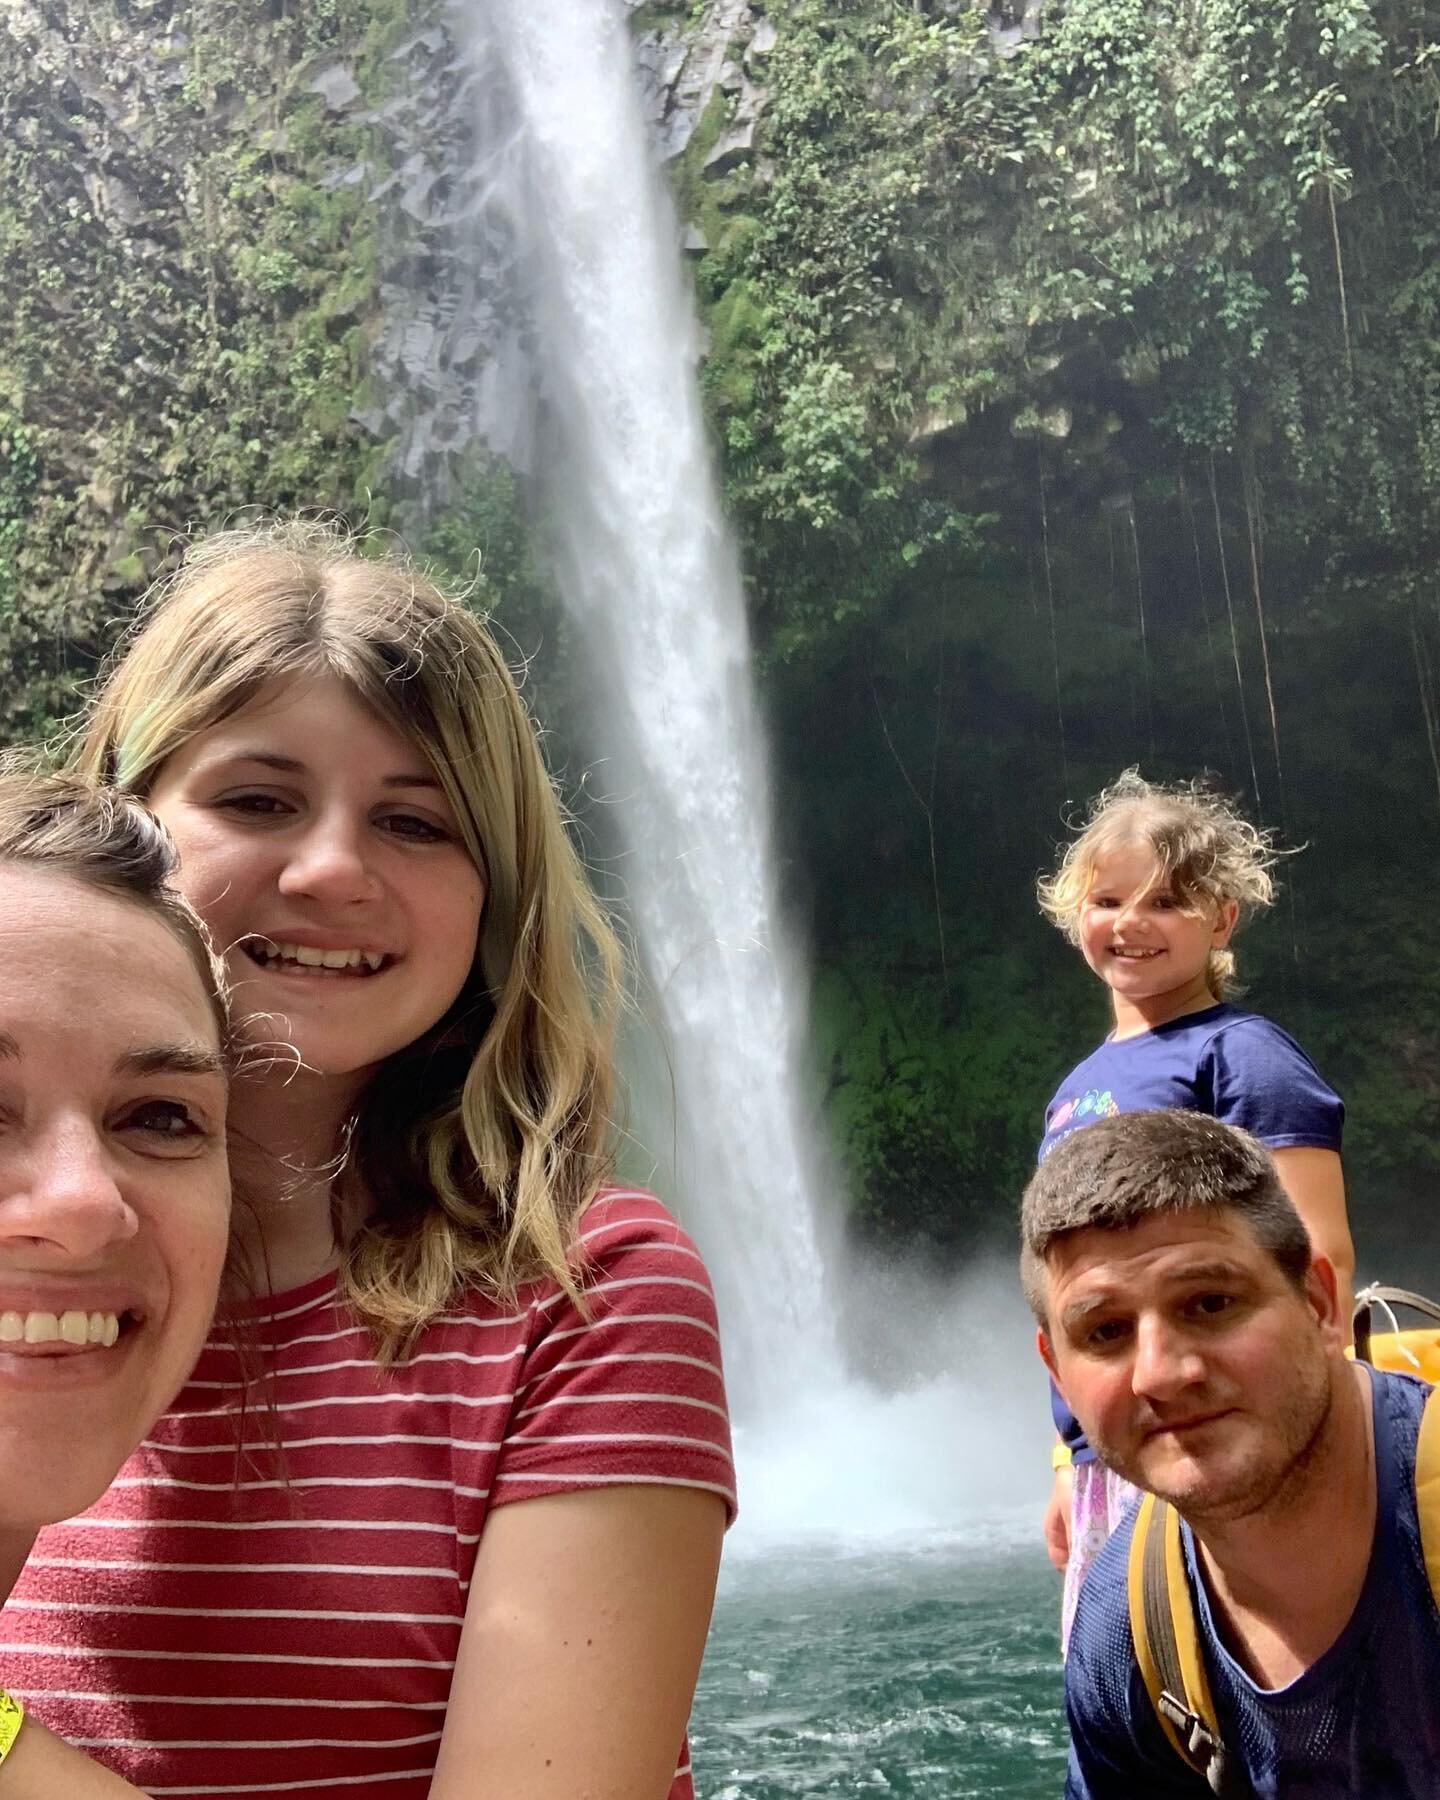 We took our gals to Costa Rica! Tried to fit the fav moments here but I'll have to continue this in our stories 💚. Truly delightful to return together to the place we met and to introduce our daughters to a country we love. #costarica